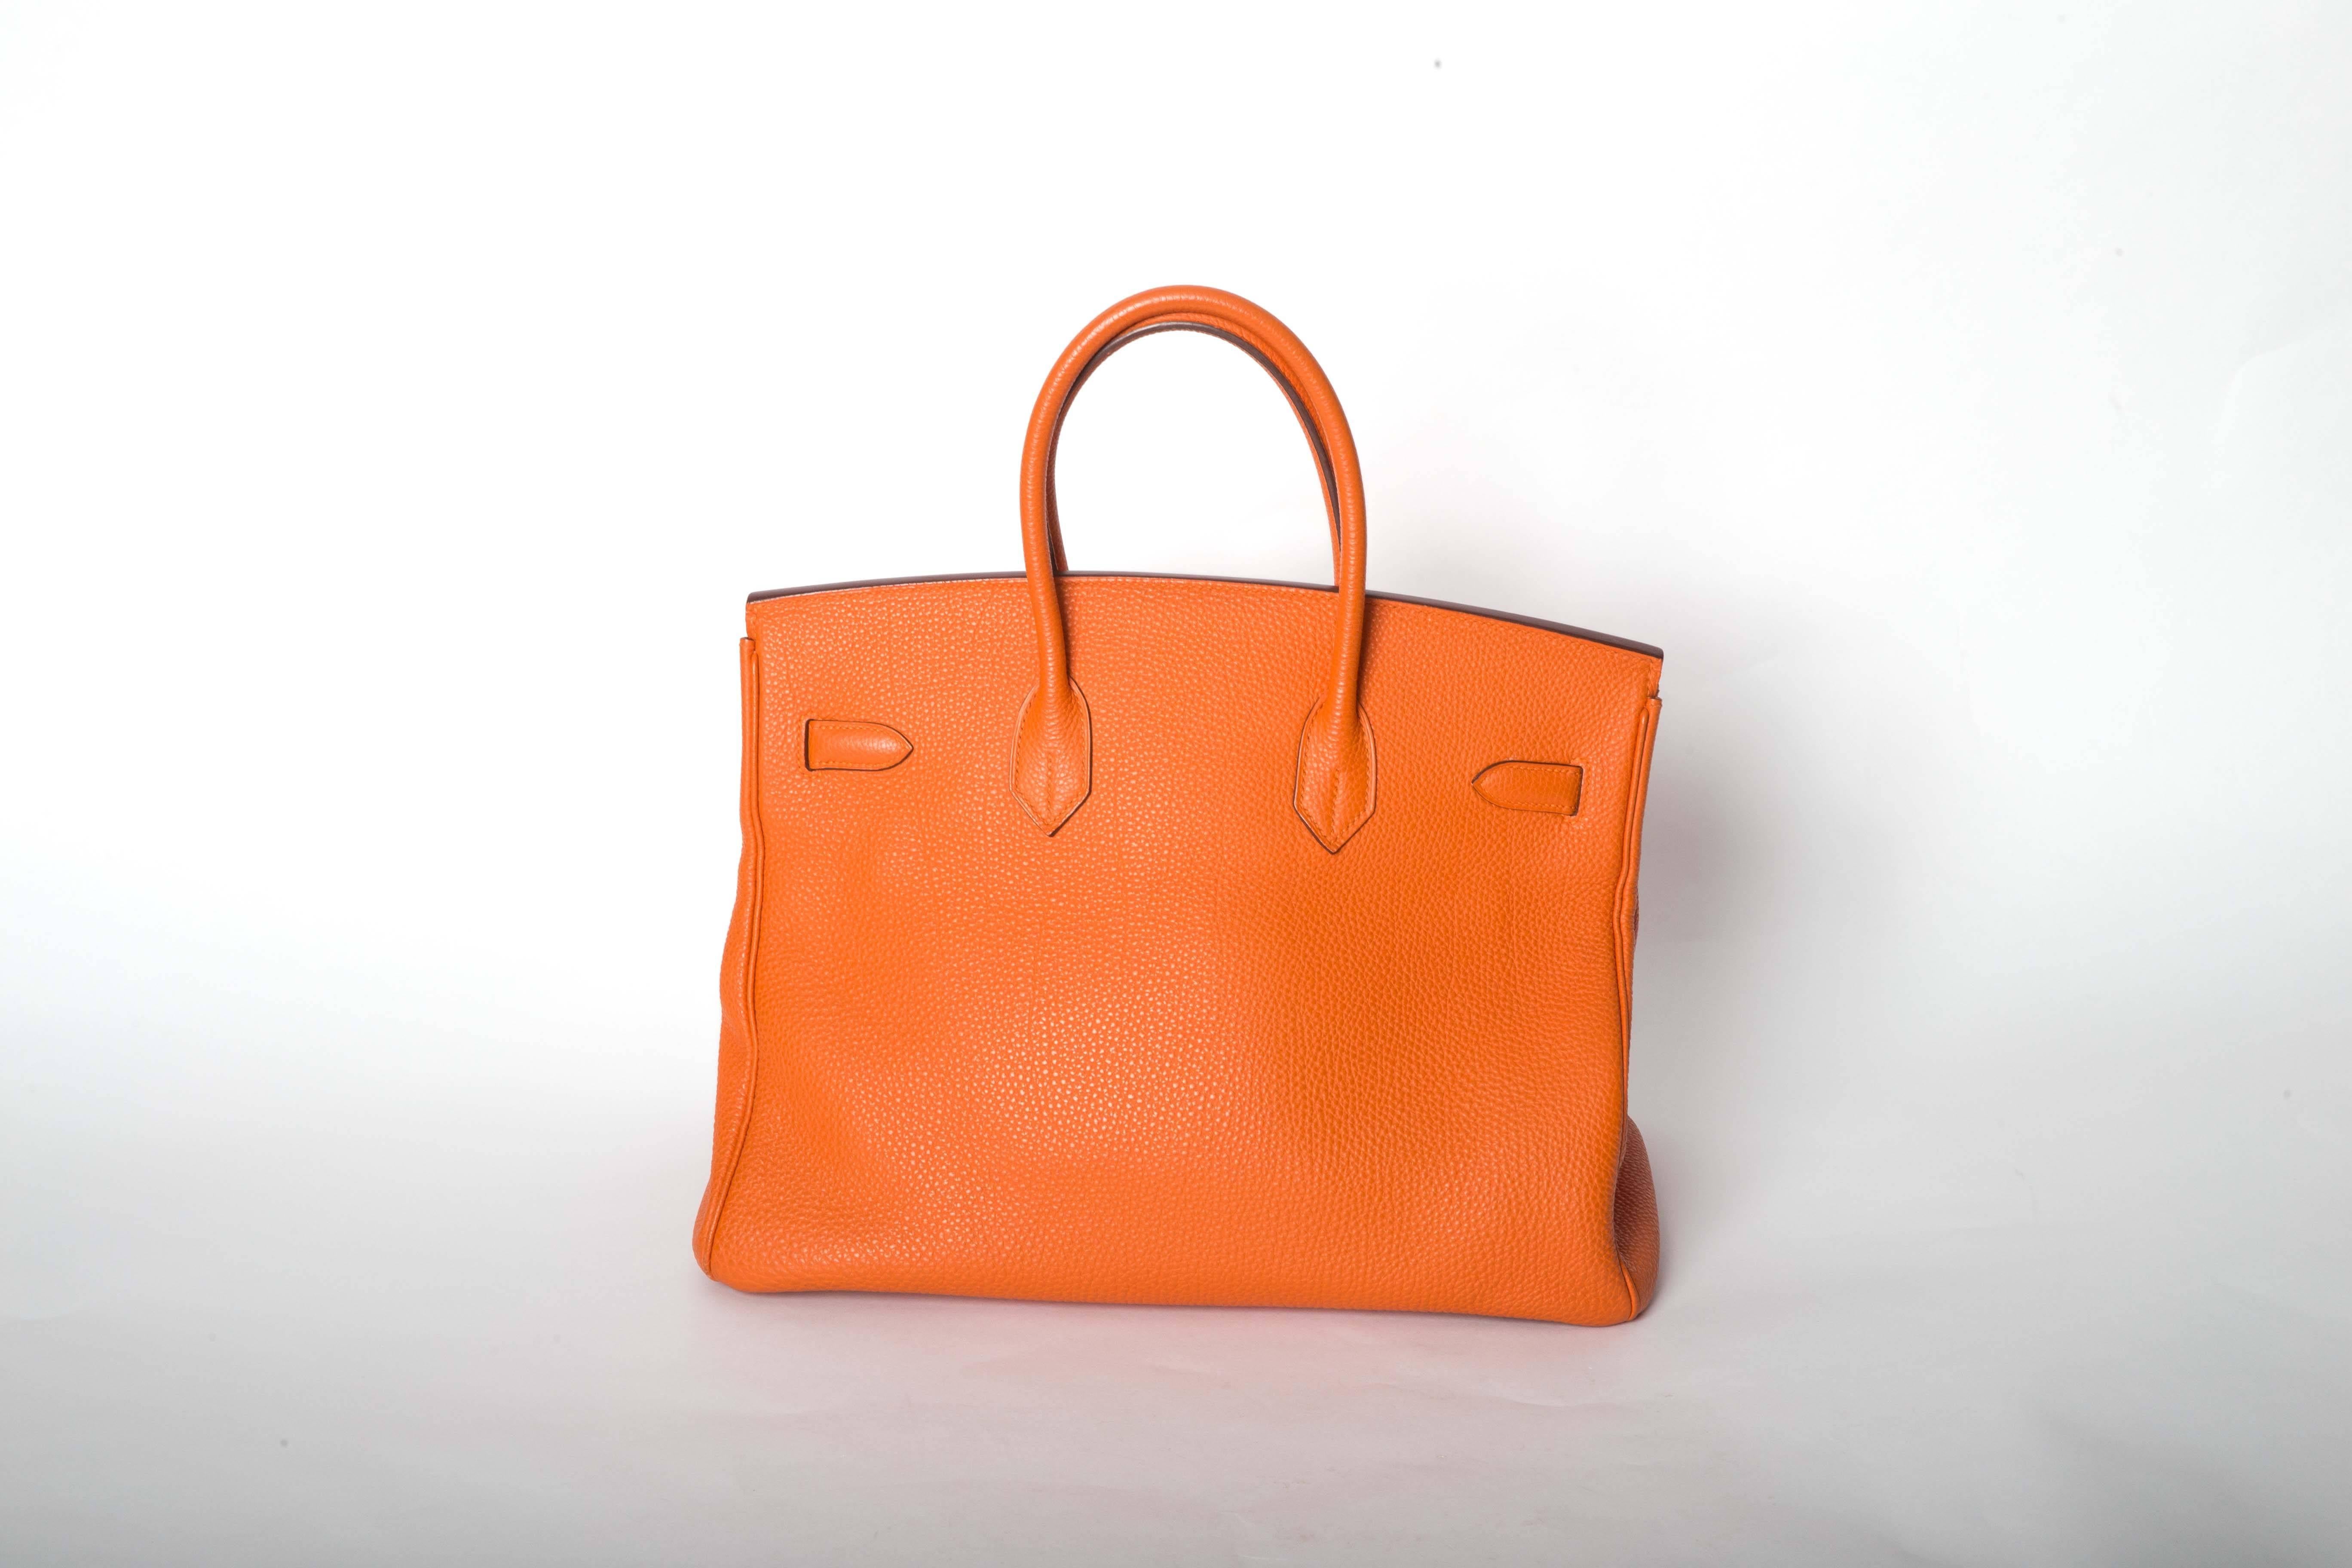 Fabulous Orange 35 cm Birkin with Gold Hardware. This Birkin is in Excellent to Very Good Condition with minimal wear to corners. The hardware is near excellent condition with the plastic film still intact on two of the three front pieces. Interior